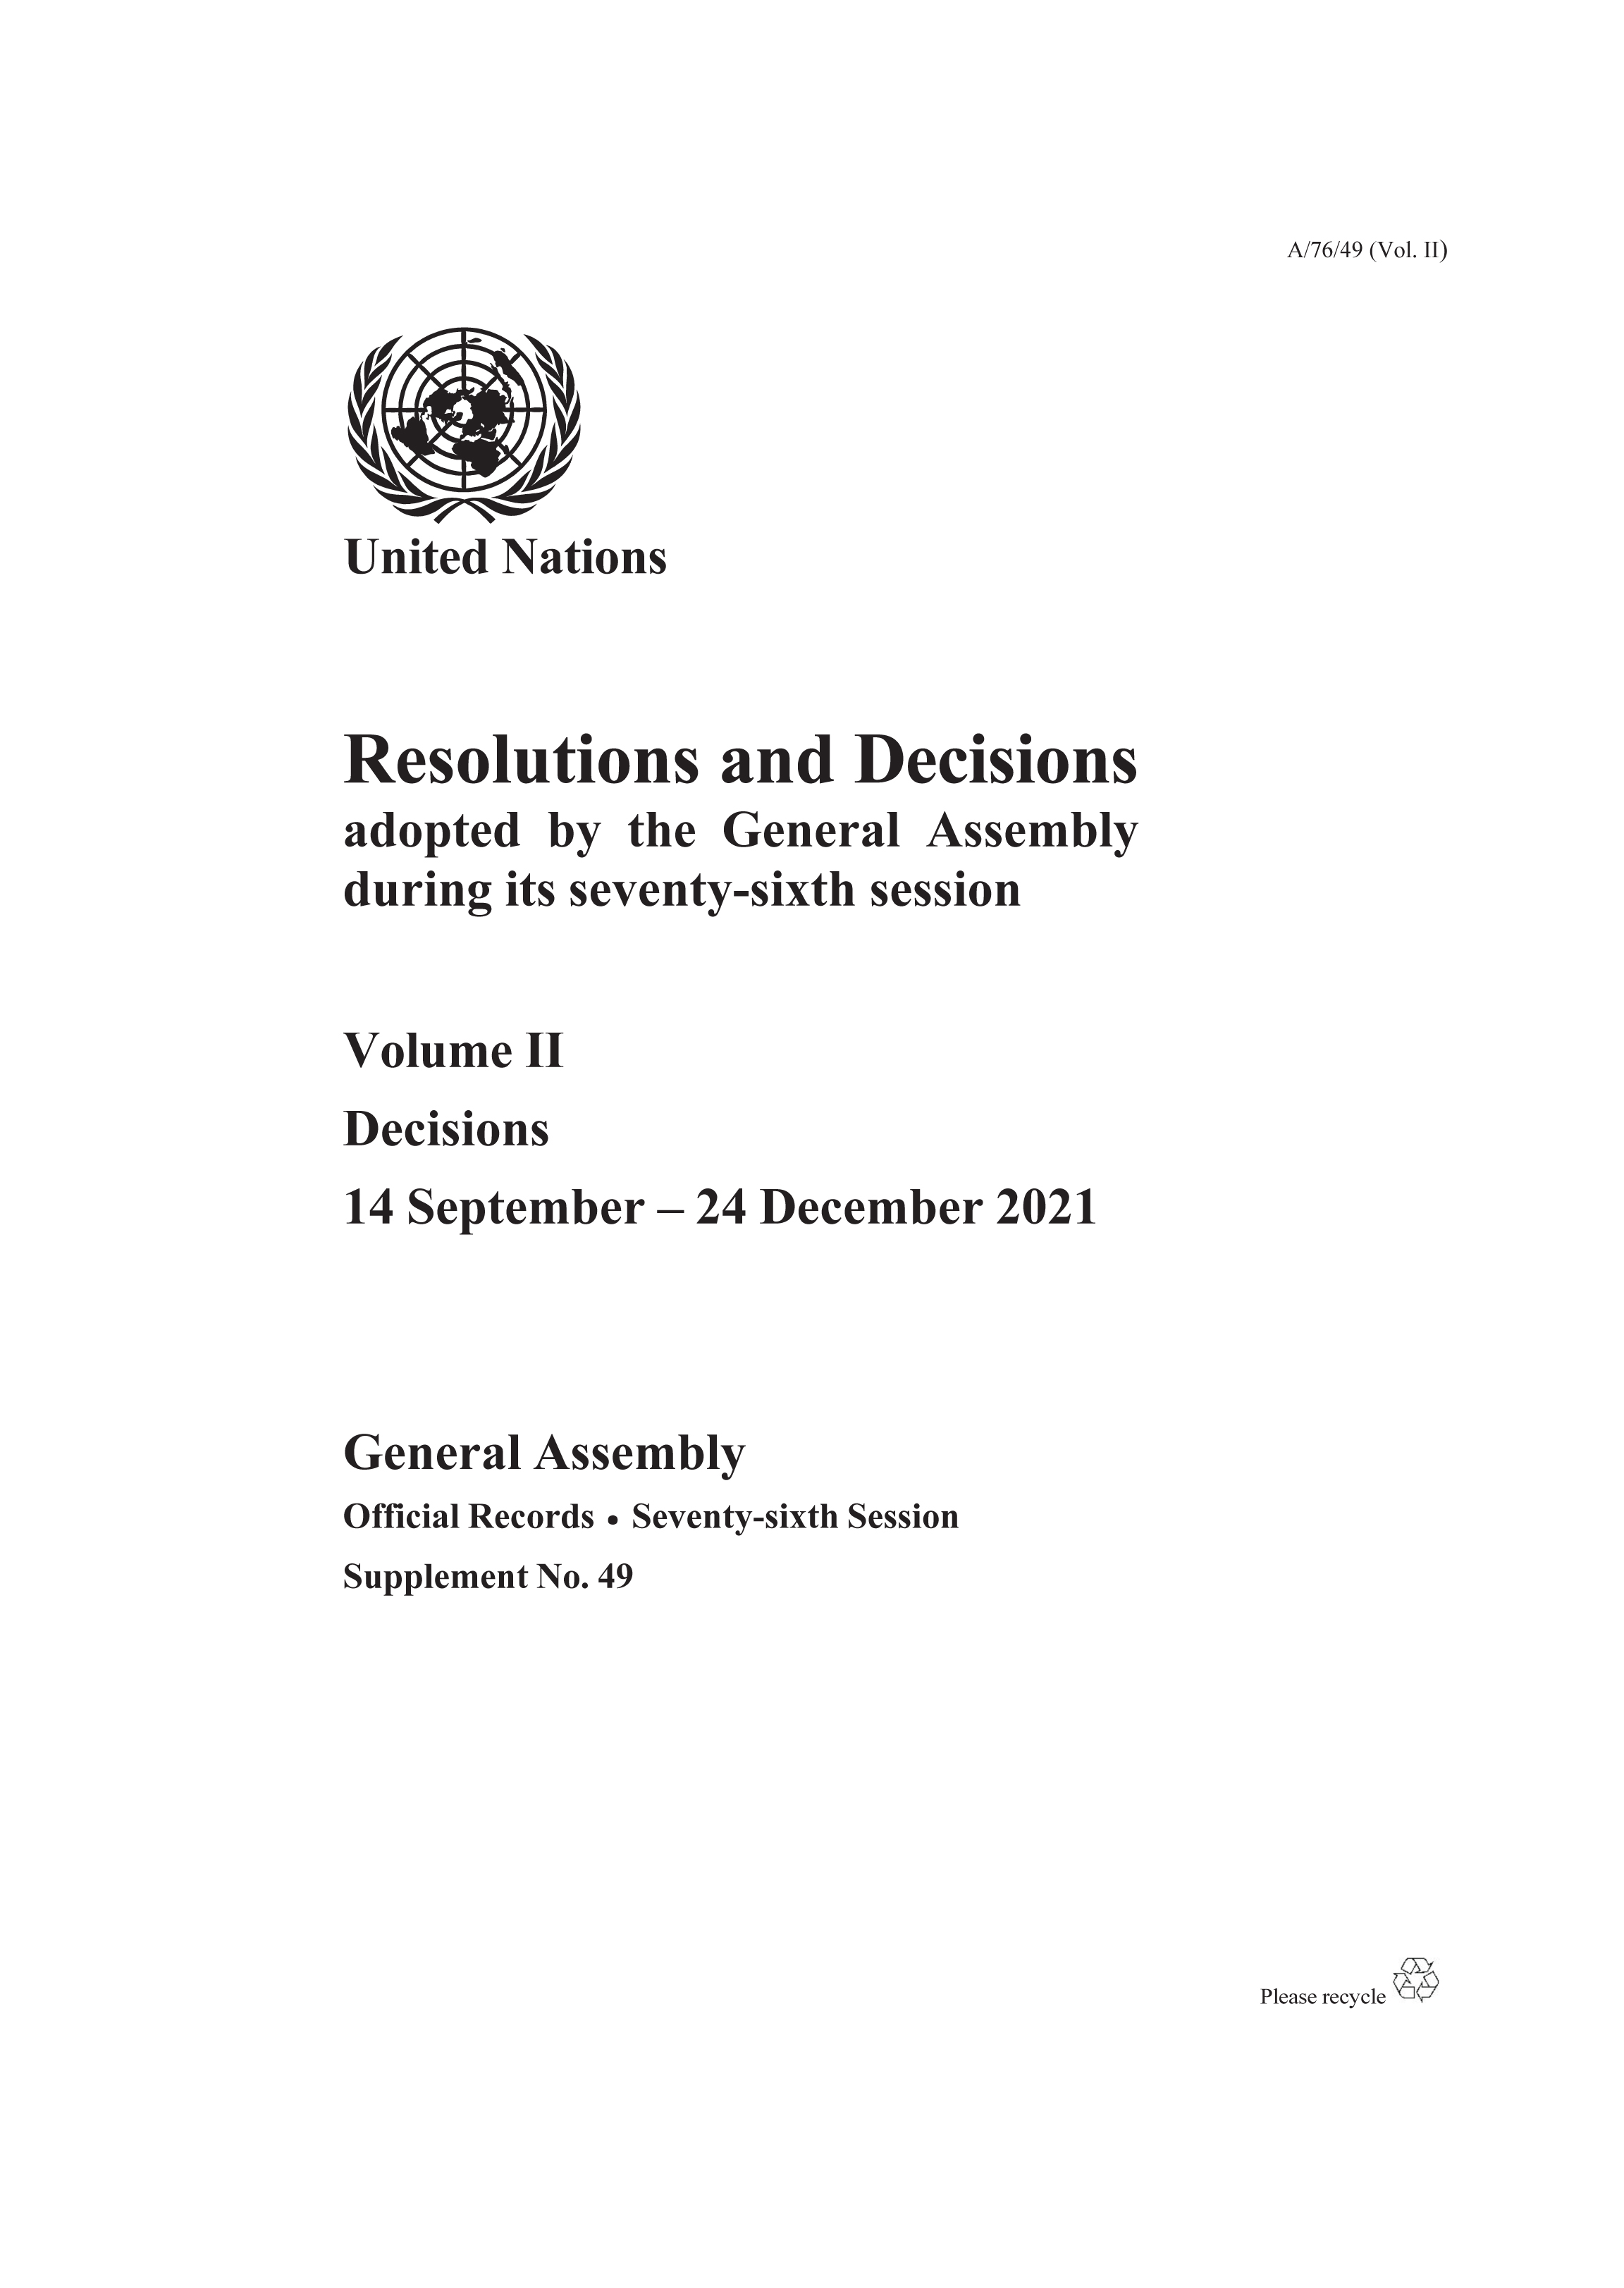 image of Resolutions and Decisions Adopted by the General Assembly During its Seventy-sixth Session: Volume II